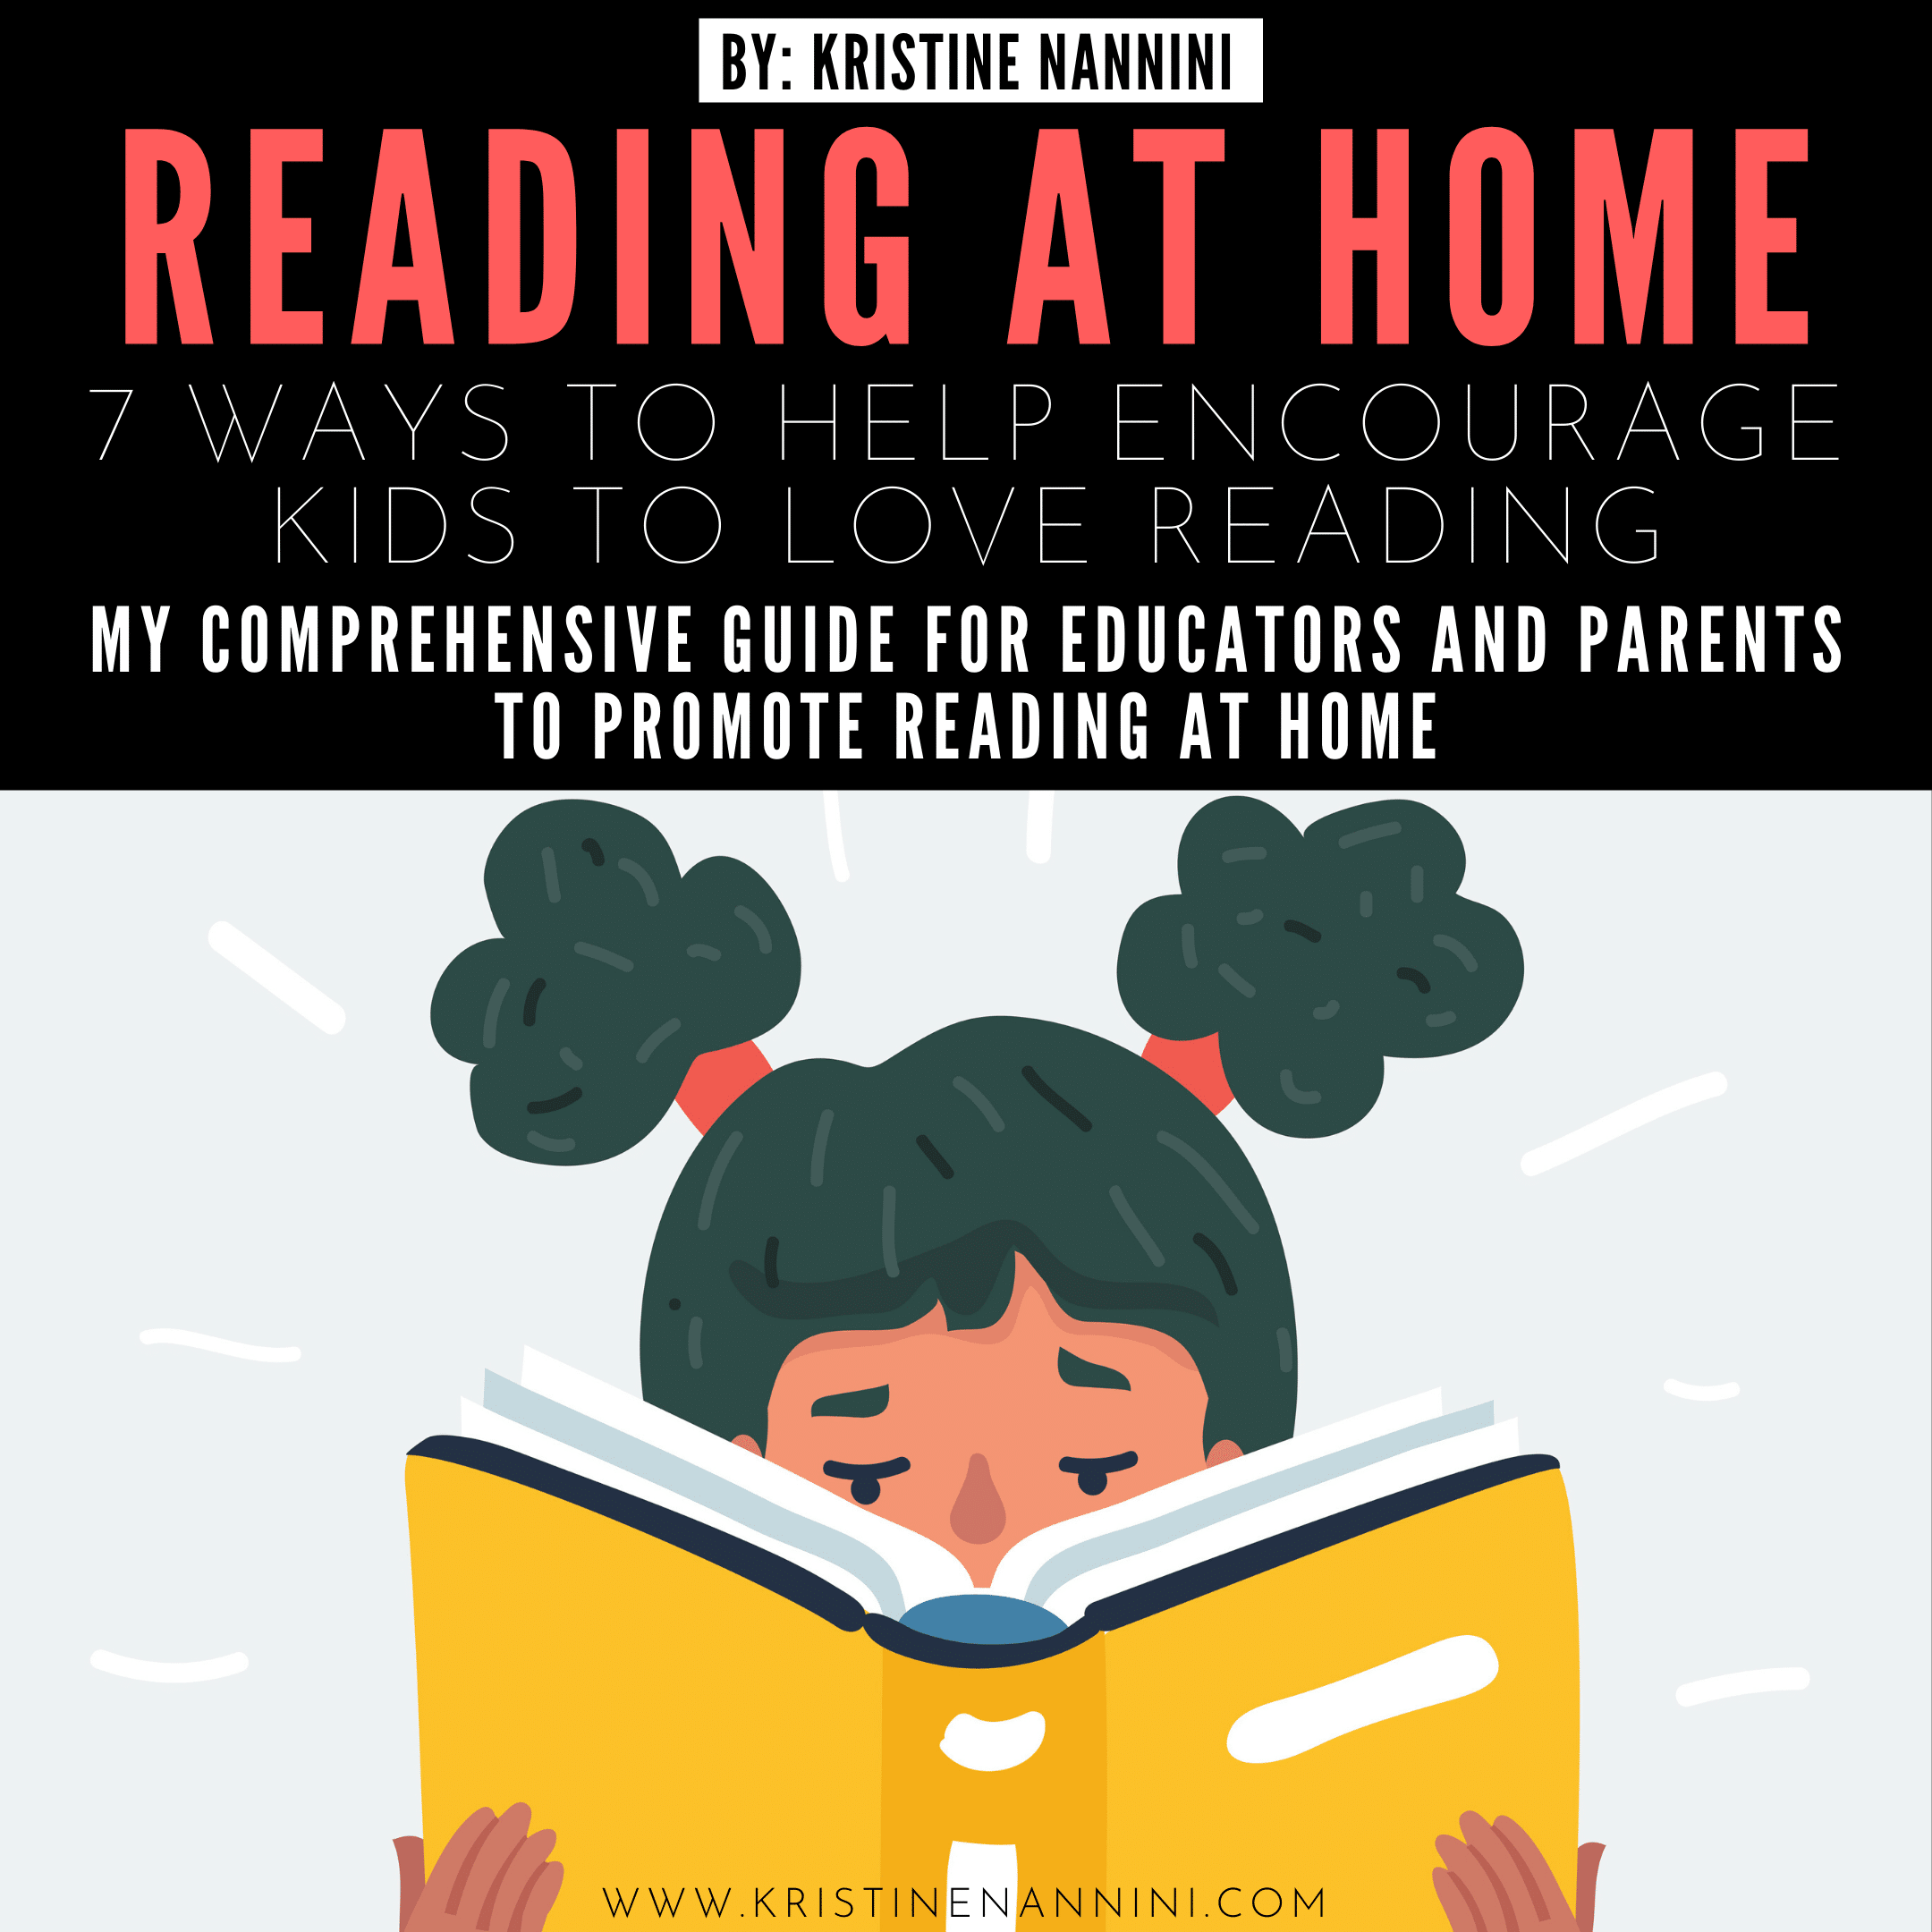 Reading at Home: 7 Ways to Help Encourage Kids to Love Reading